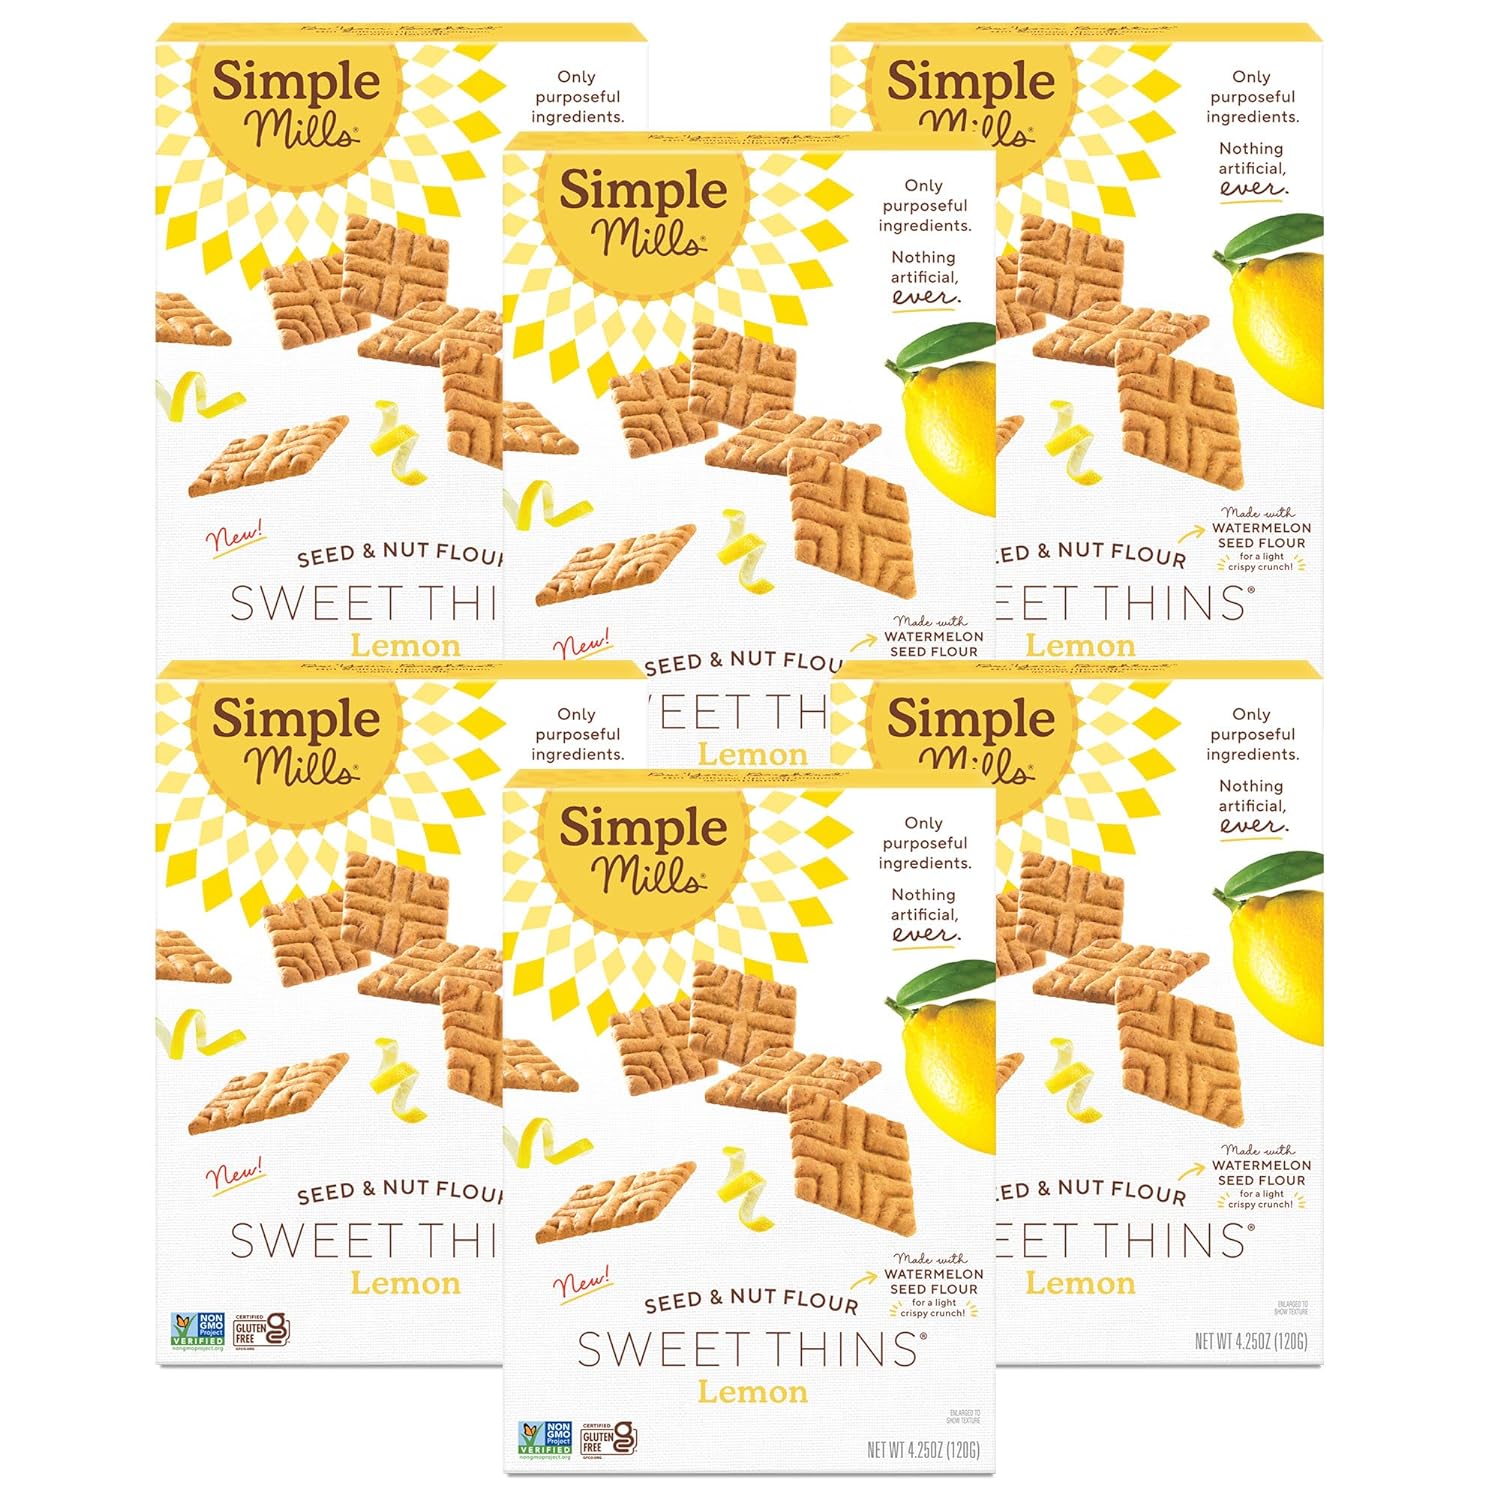 Simple Mills Lemon Seed & Nut Flour Sweet Thins, Paleo Friendly & Delicious Sweet Thin Cookies, Good for Snacks, Nutrient Dense, 4.25 oz (Pack of 6)